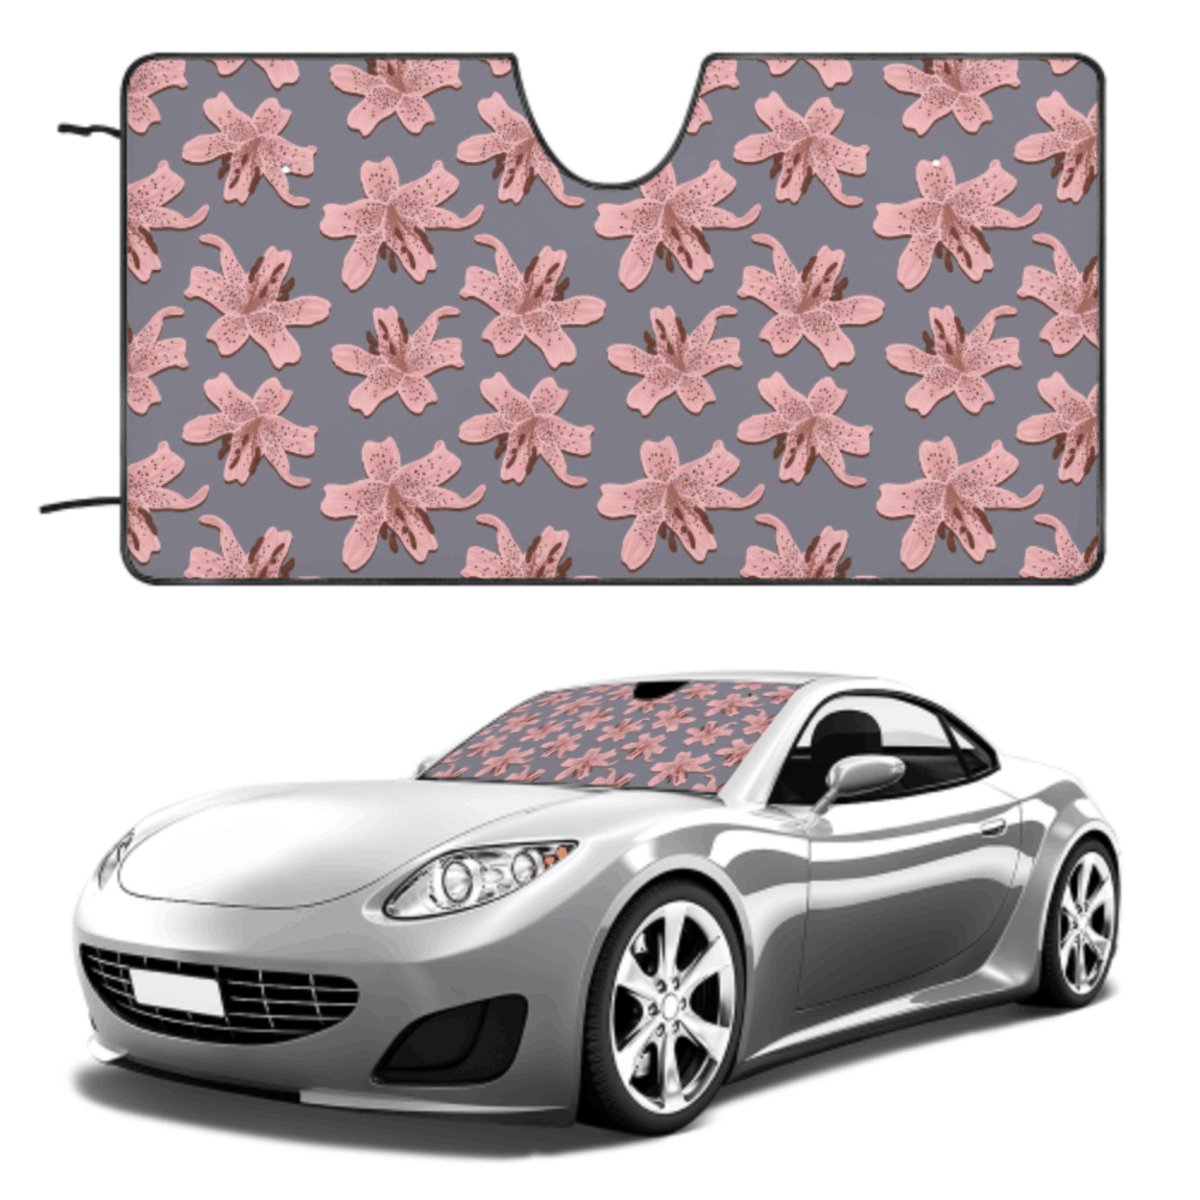 Aesthetic Pastel Sky Sunshade for Windshield Matching Car Accessories sold  by Coral Grenada, SKU 43030087